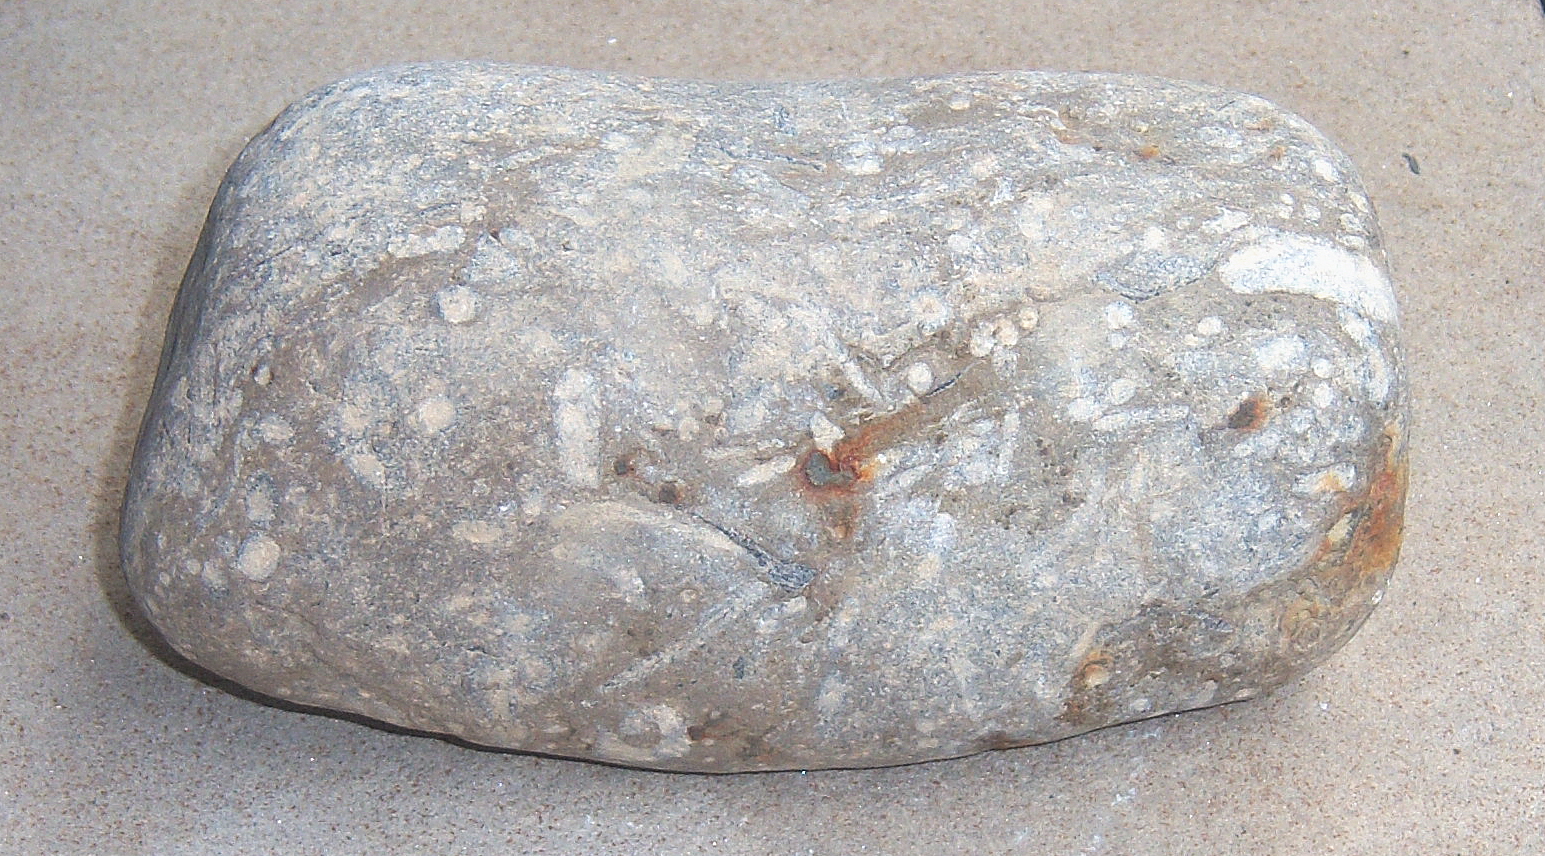 [Fossil+Rock+from+Quarry+for+blog.jpg]